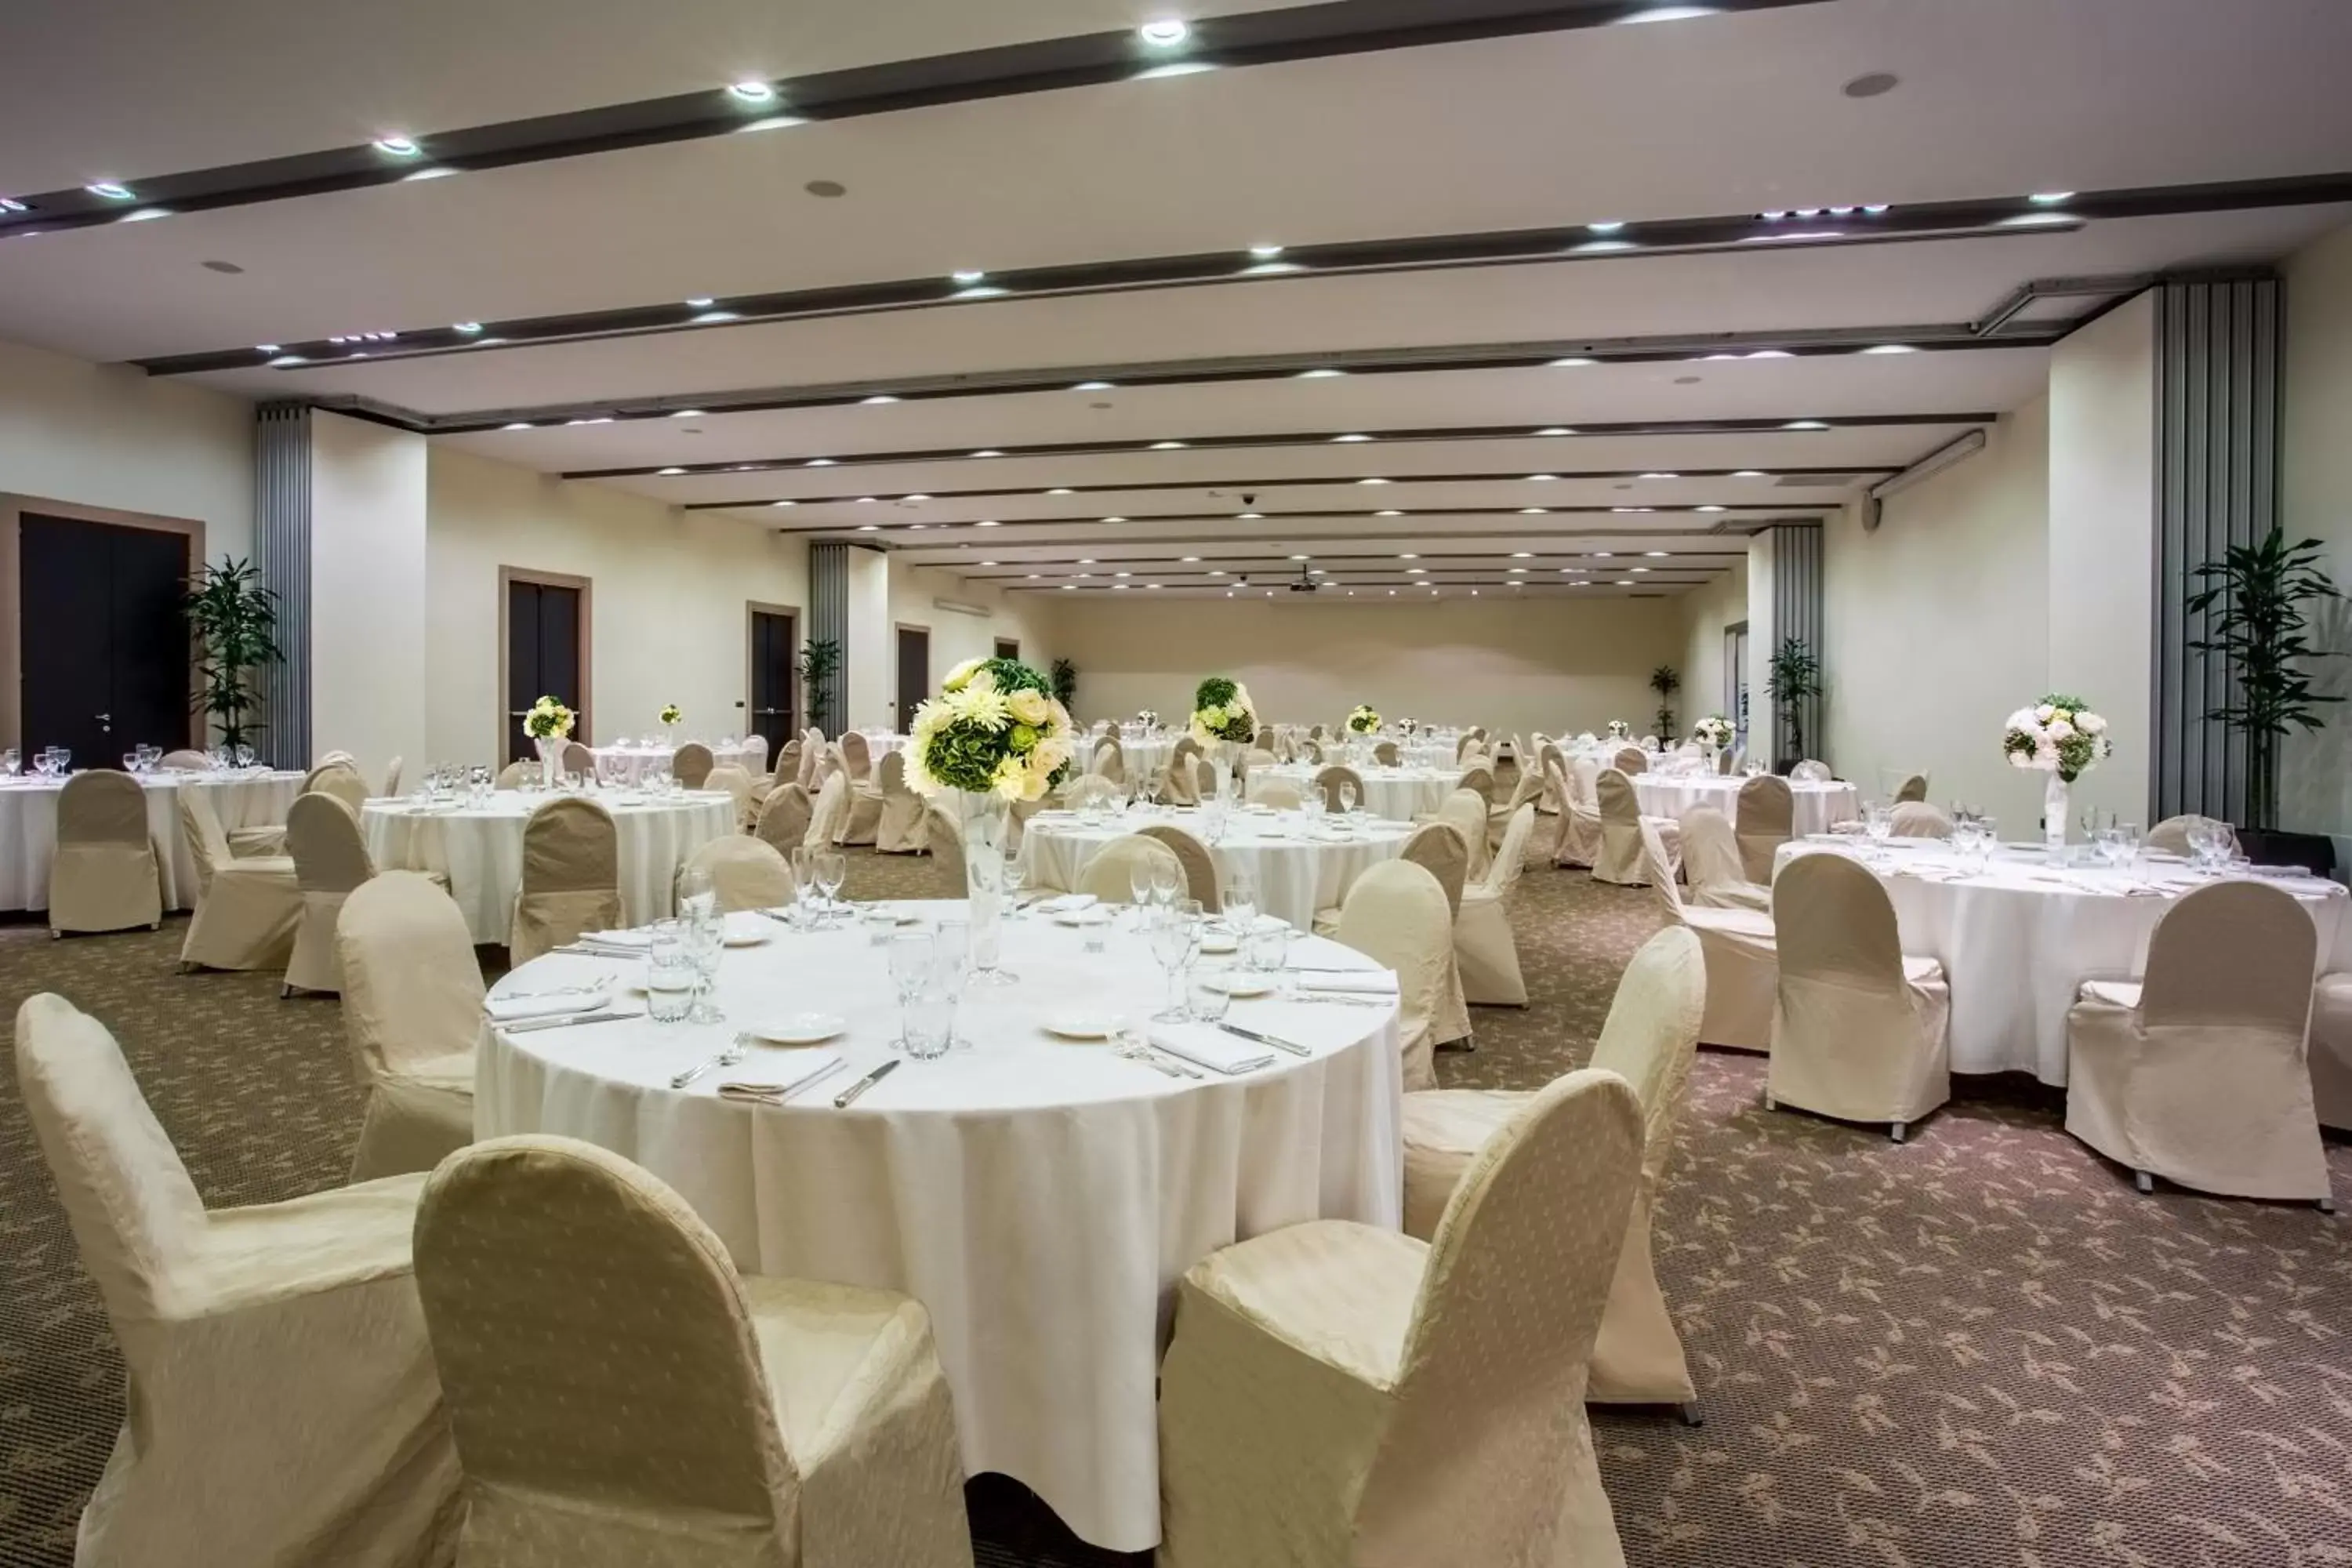 Banquet/Function facilities, Banquet Facilities in Crowne Plaza Rome St. Peter's, an IHG Hotel